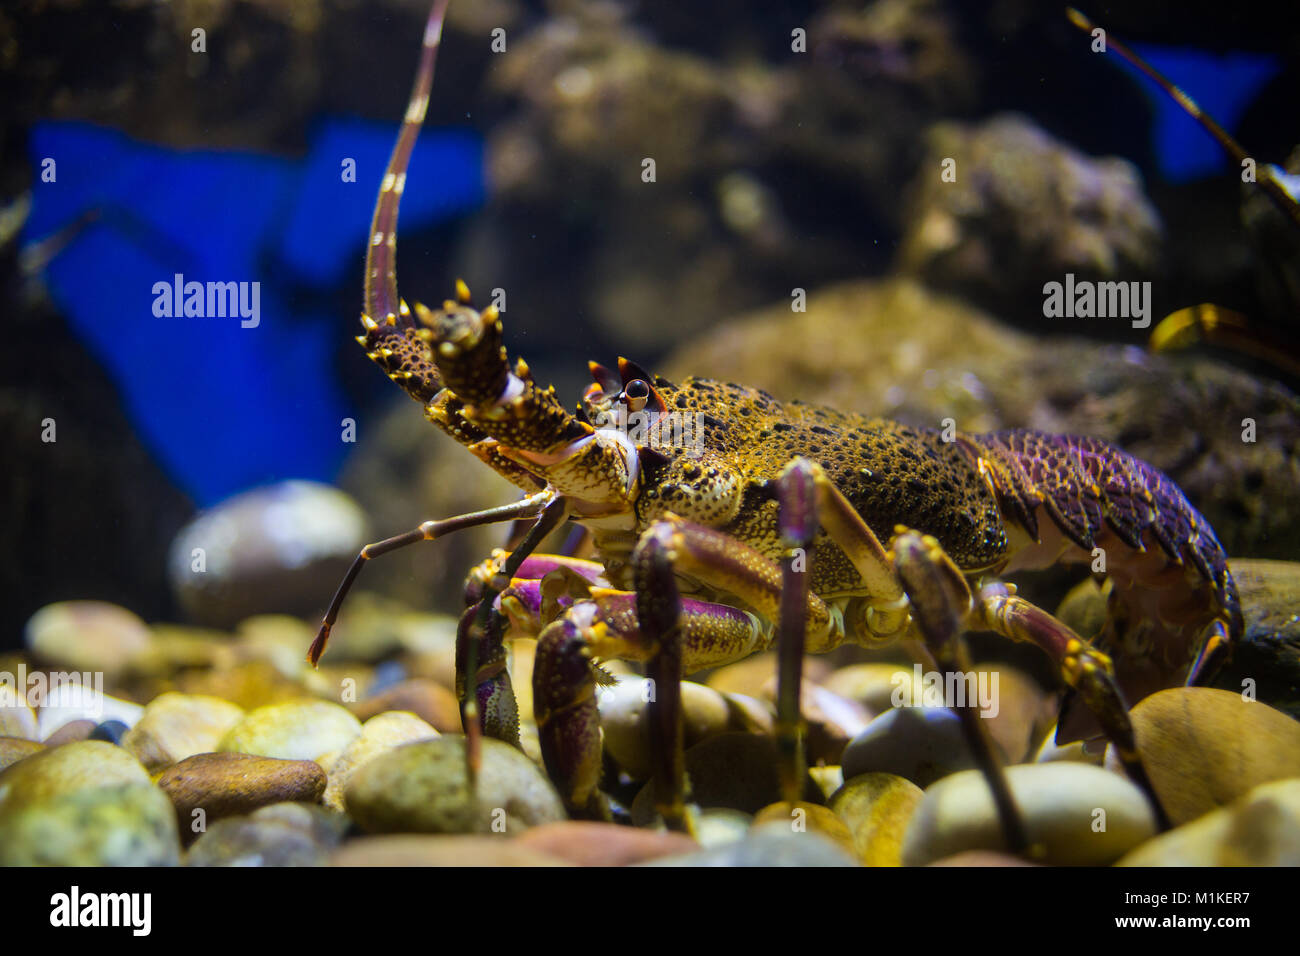 Close up image of a rock lobster in an aquarium, close to the west coast of south africa Stock Photo